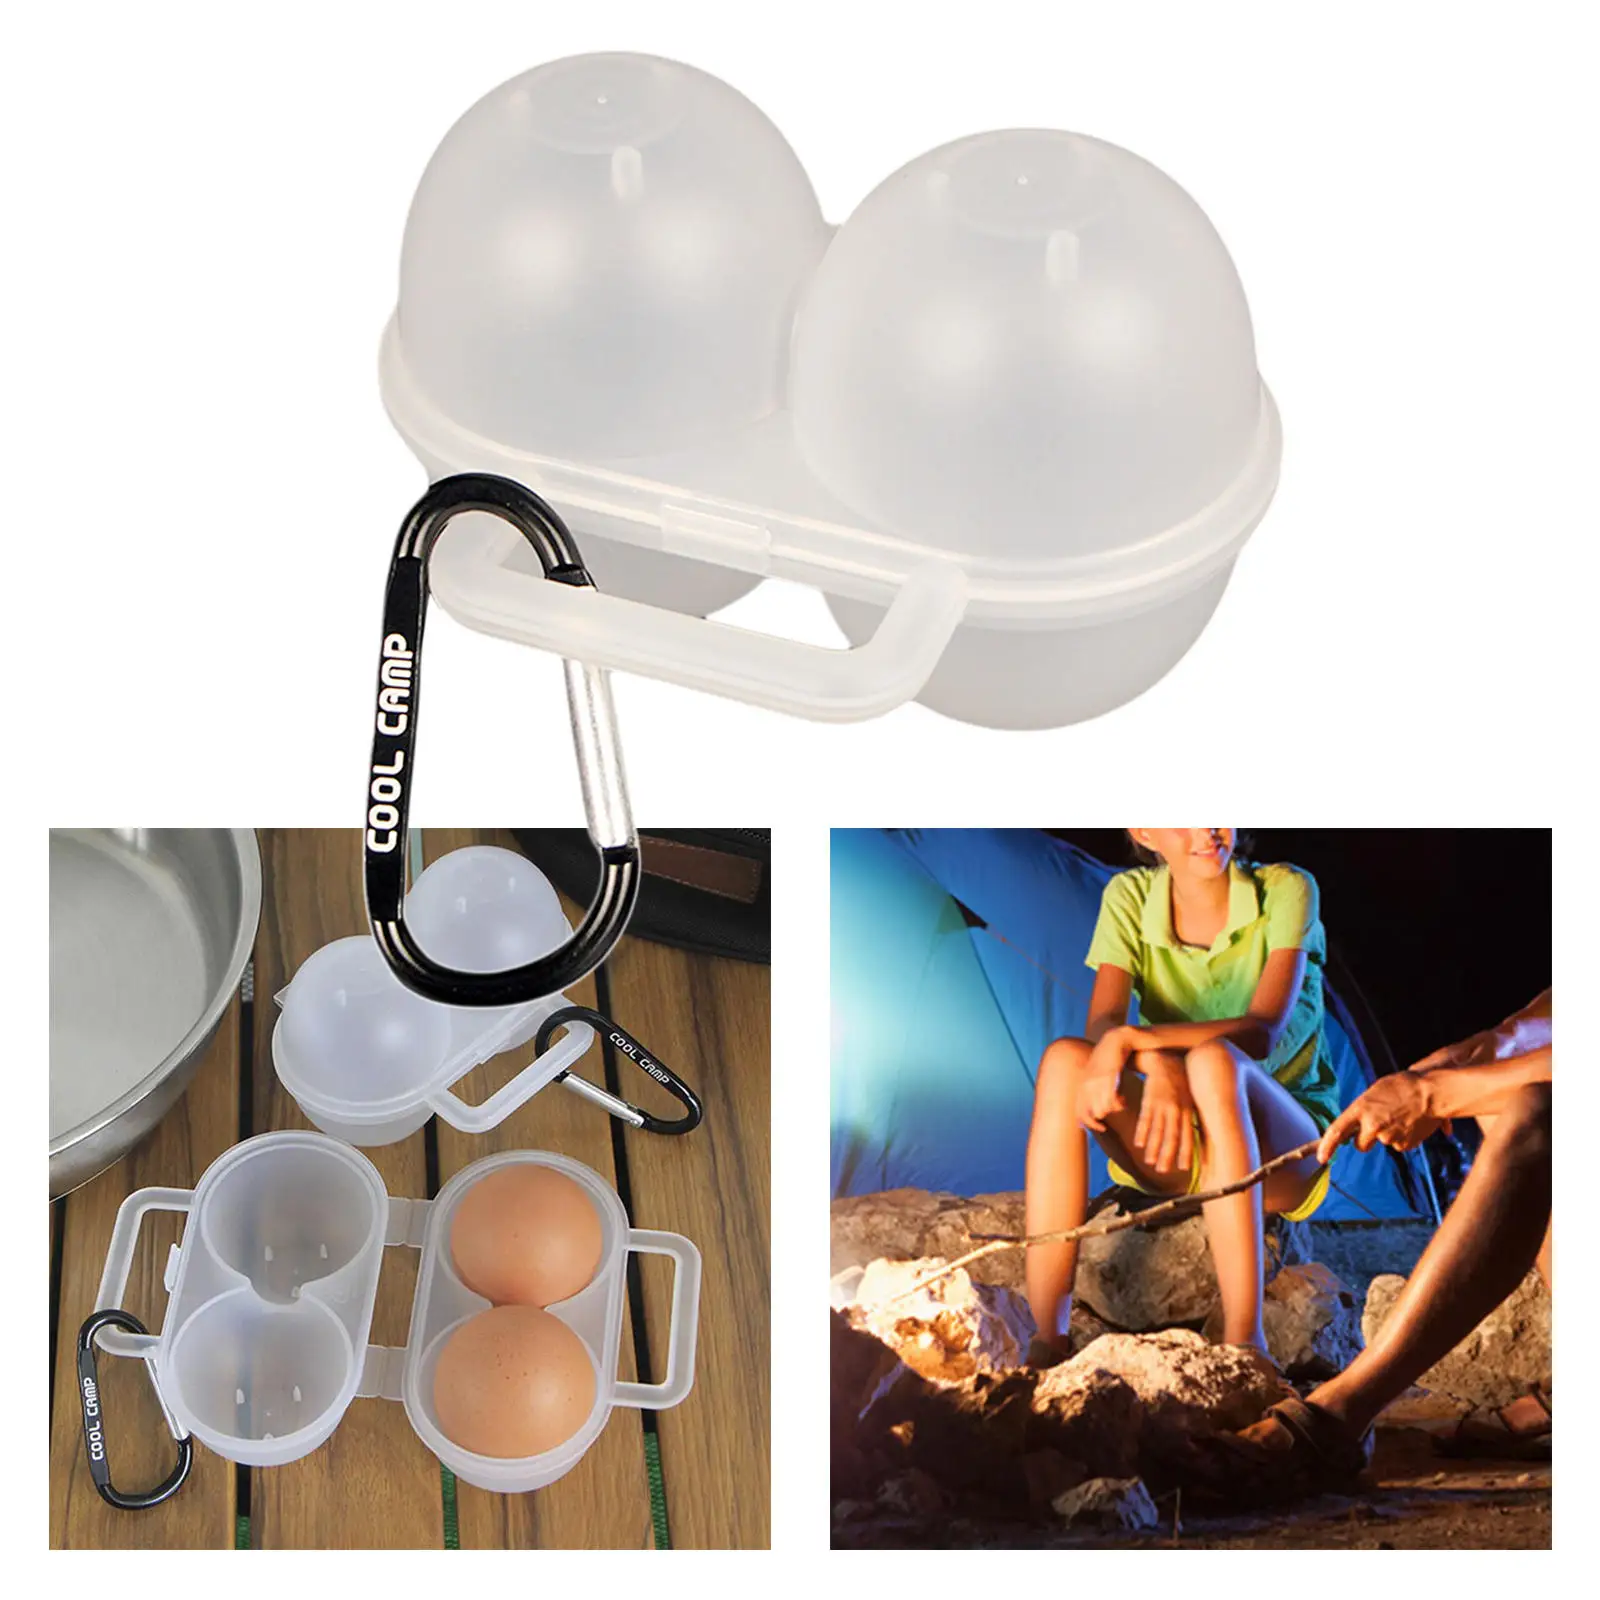 2 Grid Egg Storage Box Portable Egg Holder Container for Outdoor Camping Picnic Eggs Box Case Organizer Case